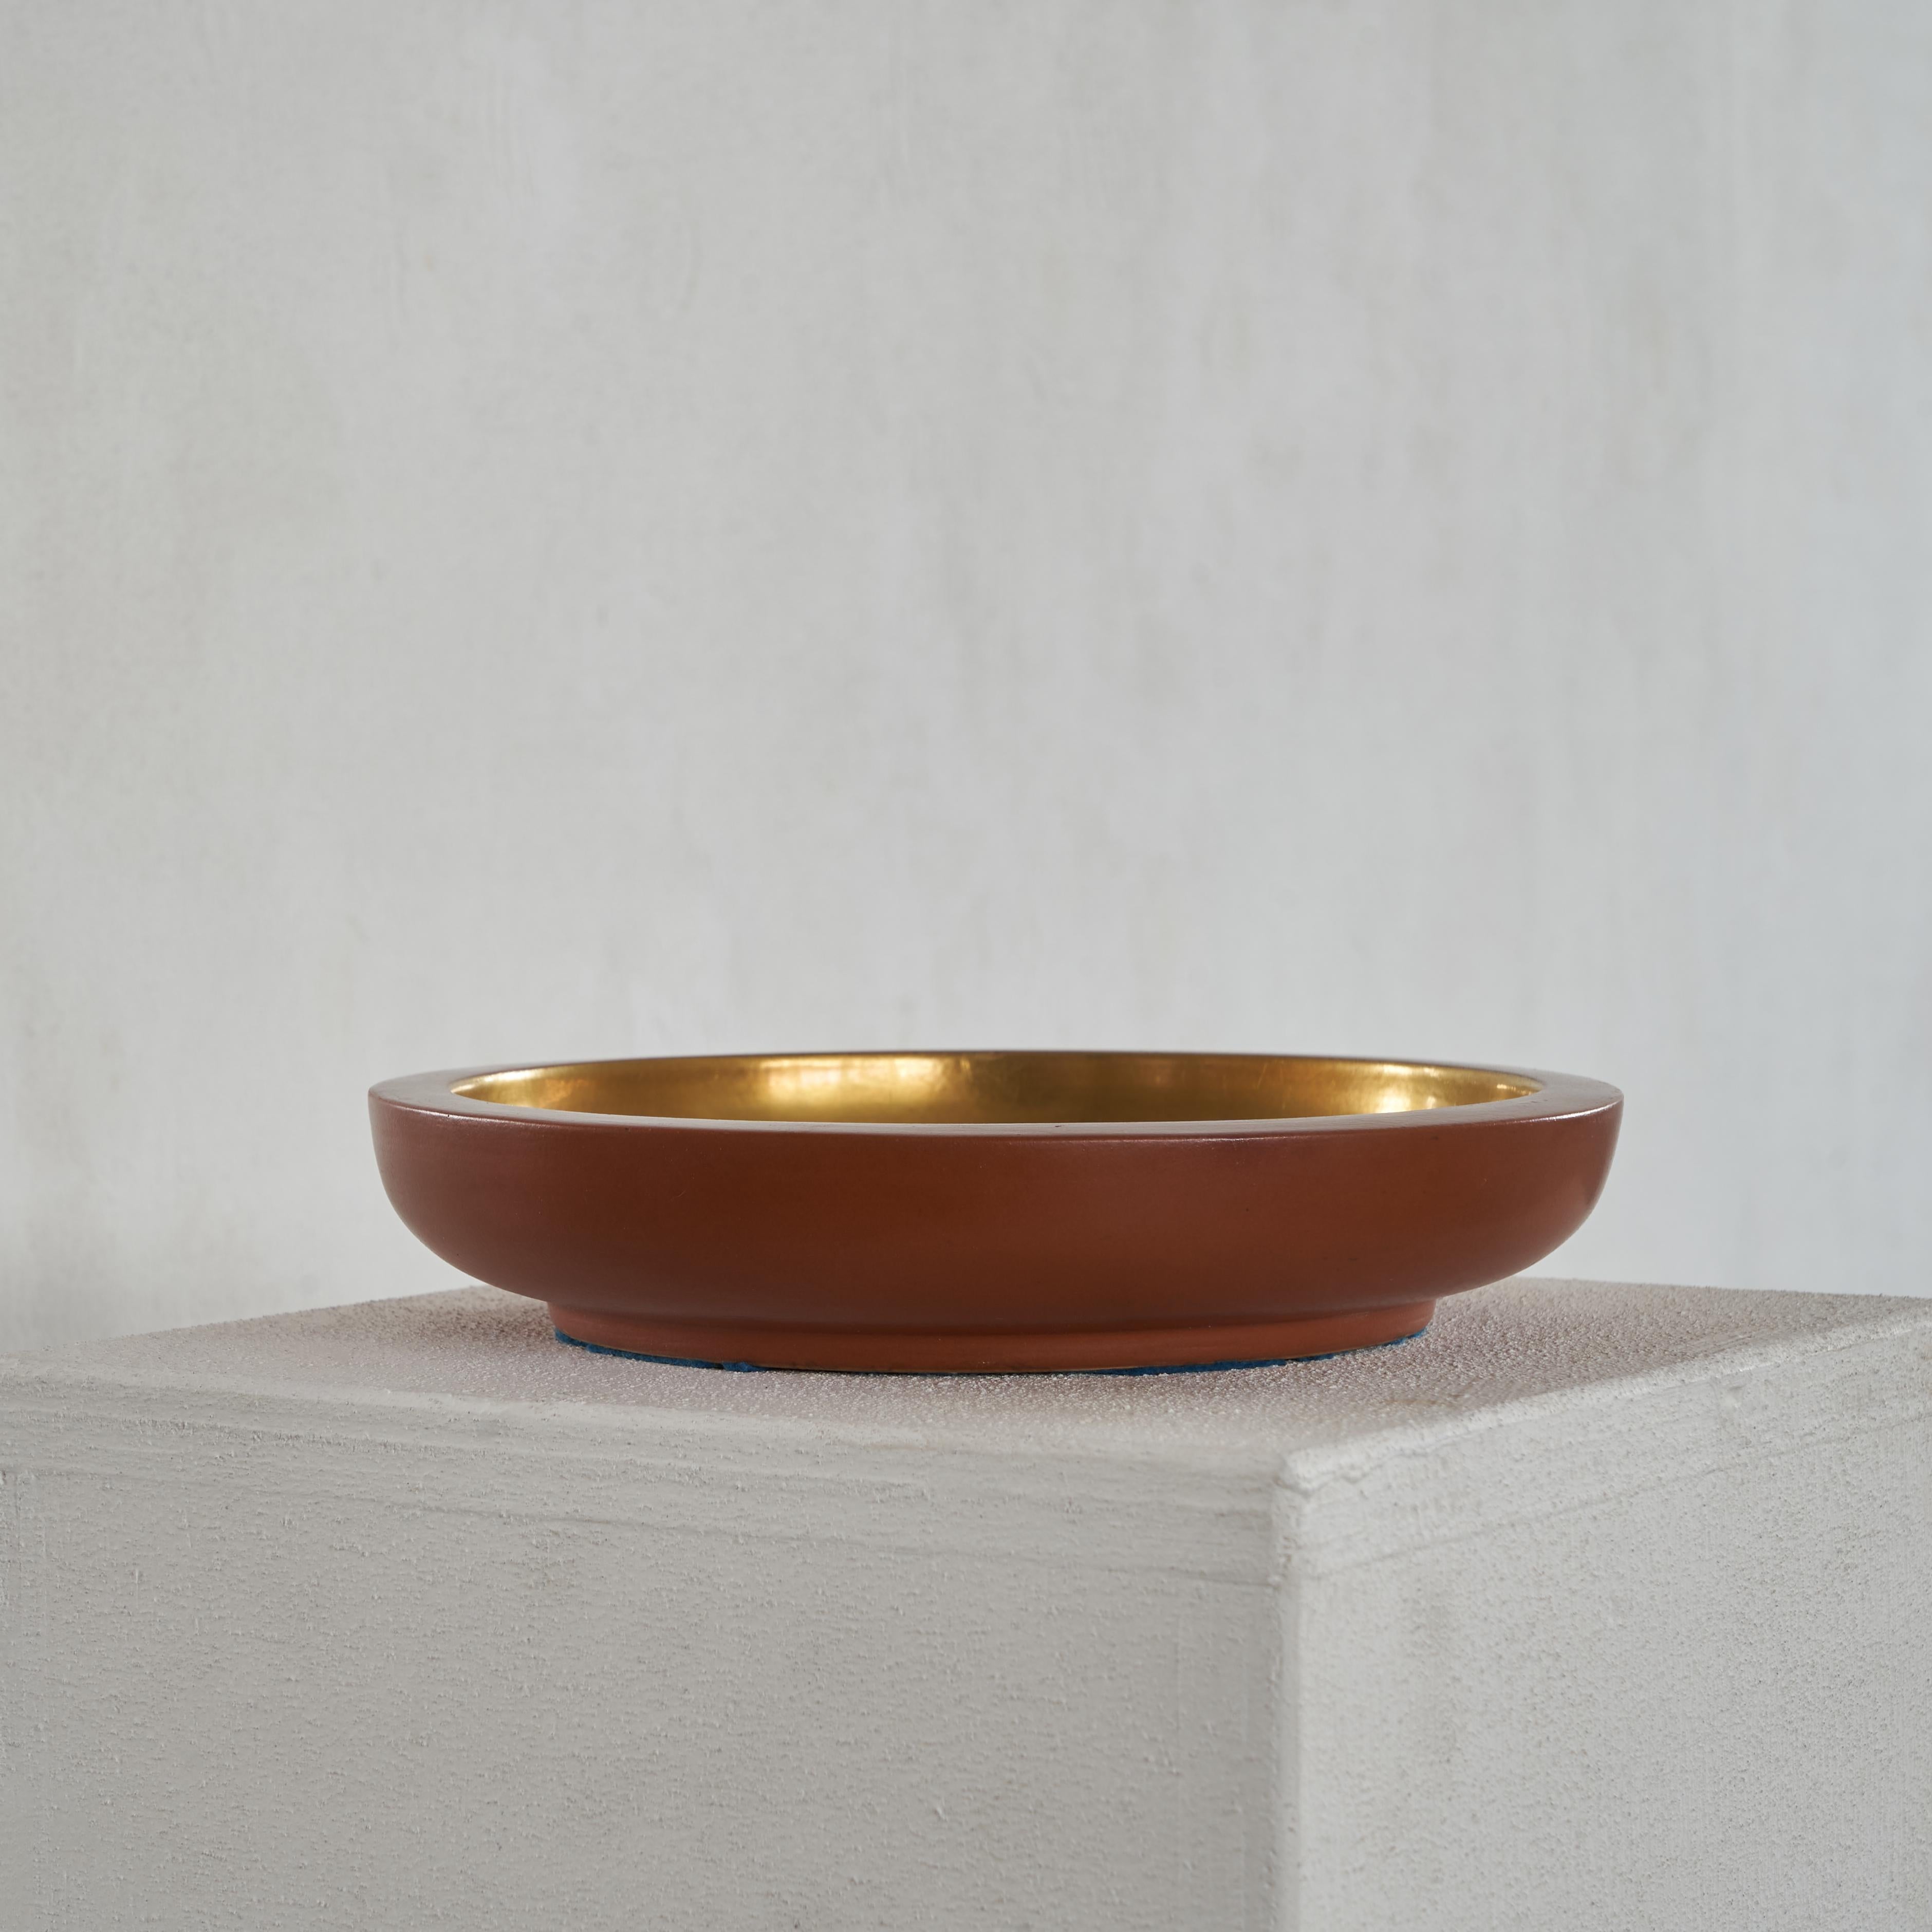 At the beginning of his famous career Giò Ponti (1891 – 1979) was art director for the Italian ceramics factory Richard Ginori. At this time he designed numerous pieces for the company, including this bowl or centerpiece in gold and